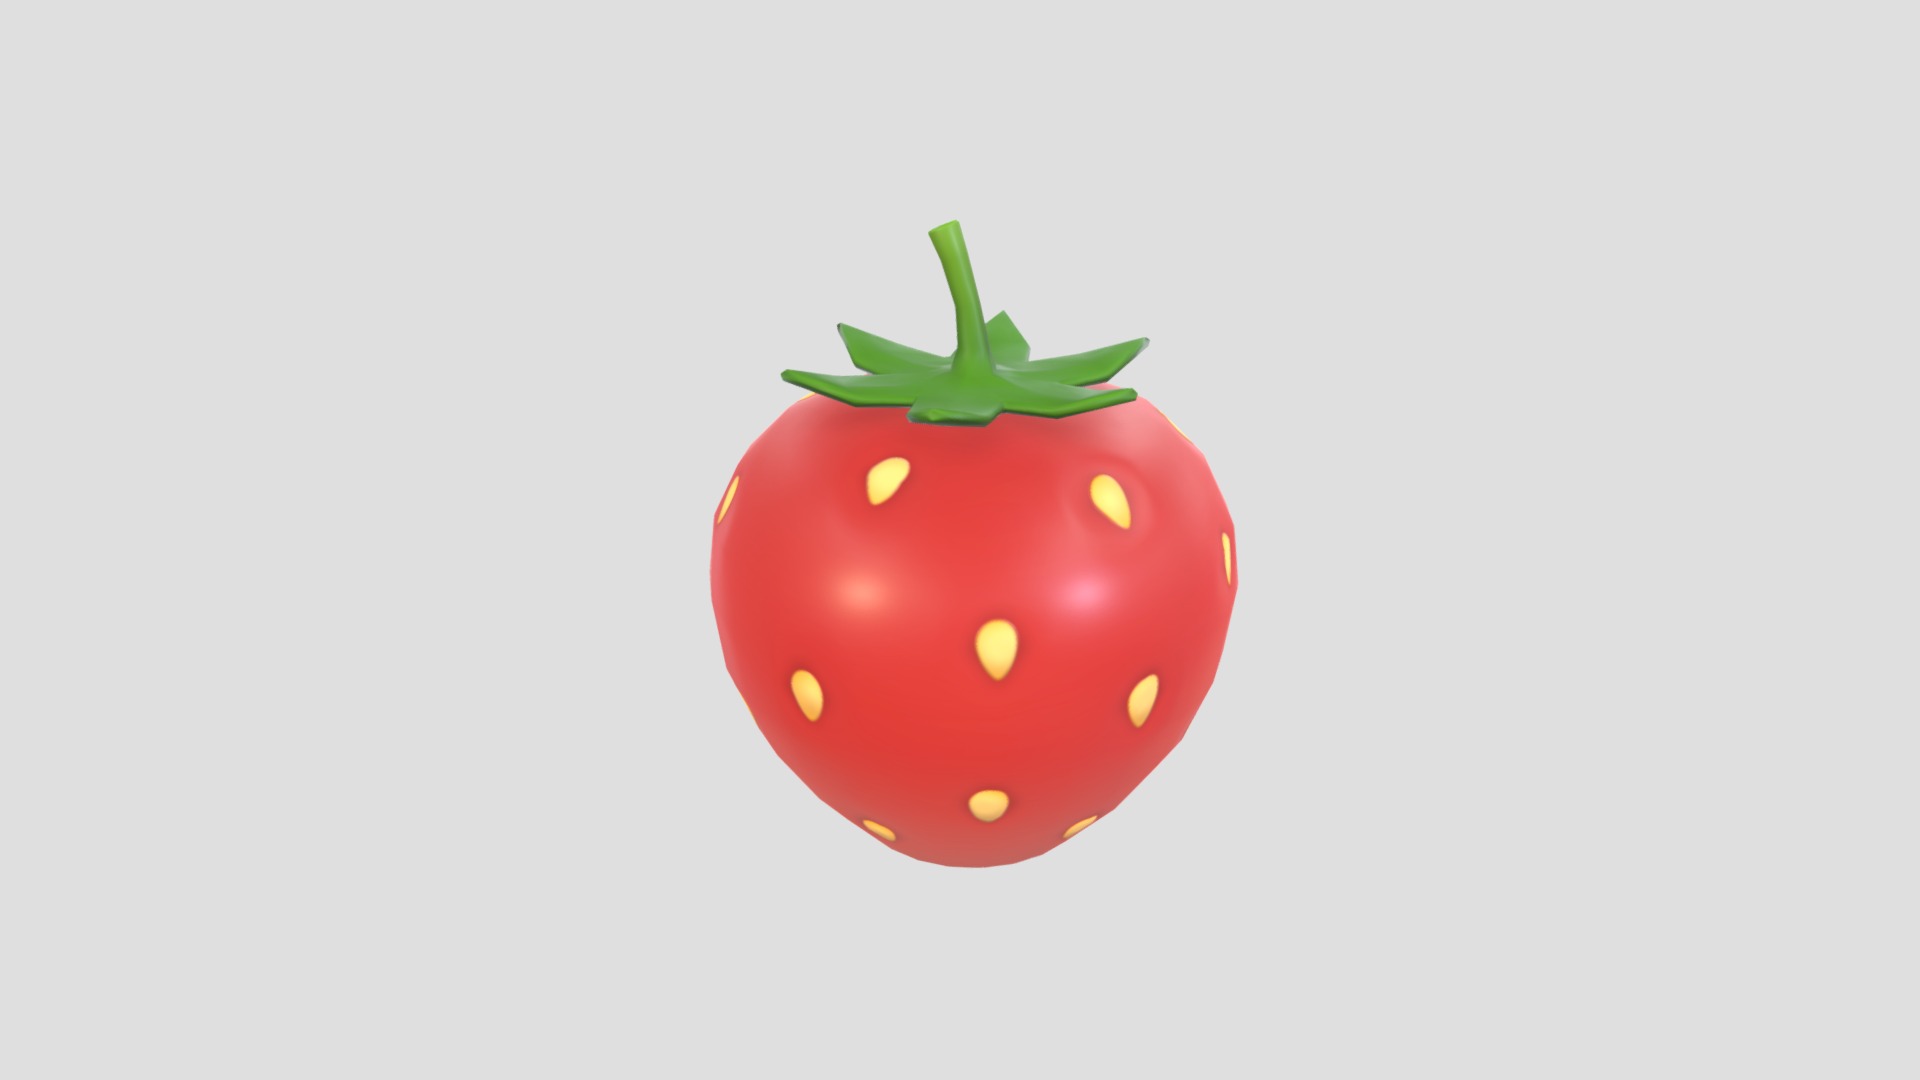 3D model Strawberry - This is a 3D model of the Strawberry. The 3D model is about a red apple with a green stem.